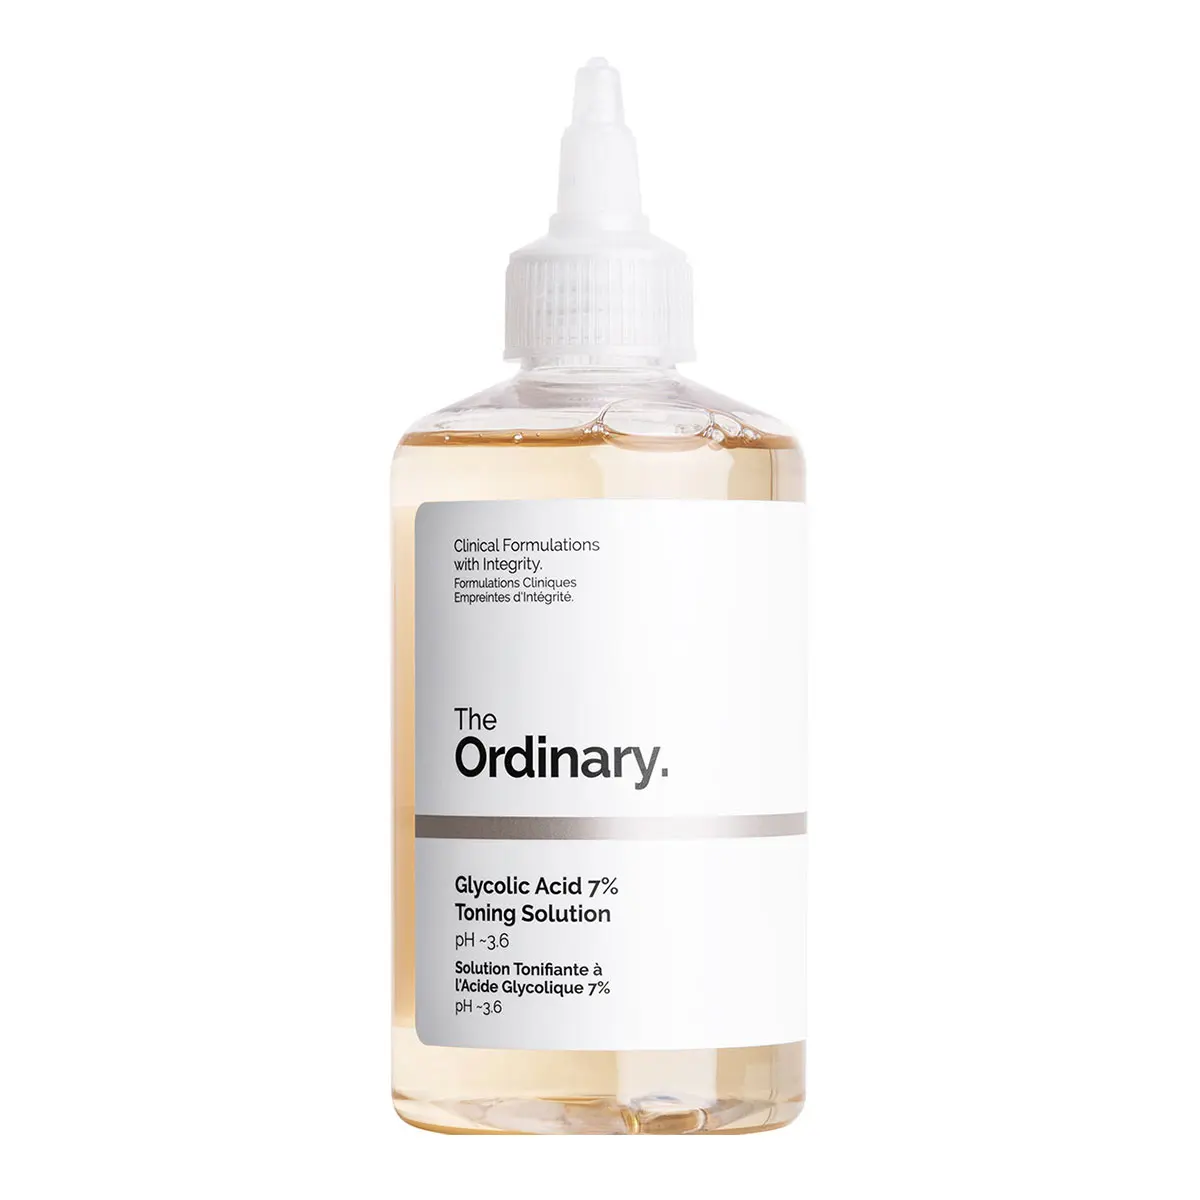 The Ordinary Glycolic Acid 7% Toning Solution 240ml Discounts and Cashback